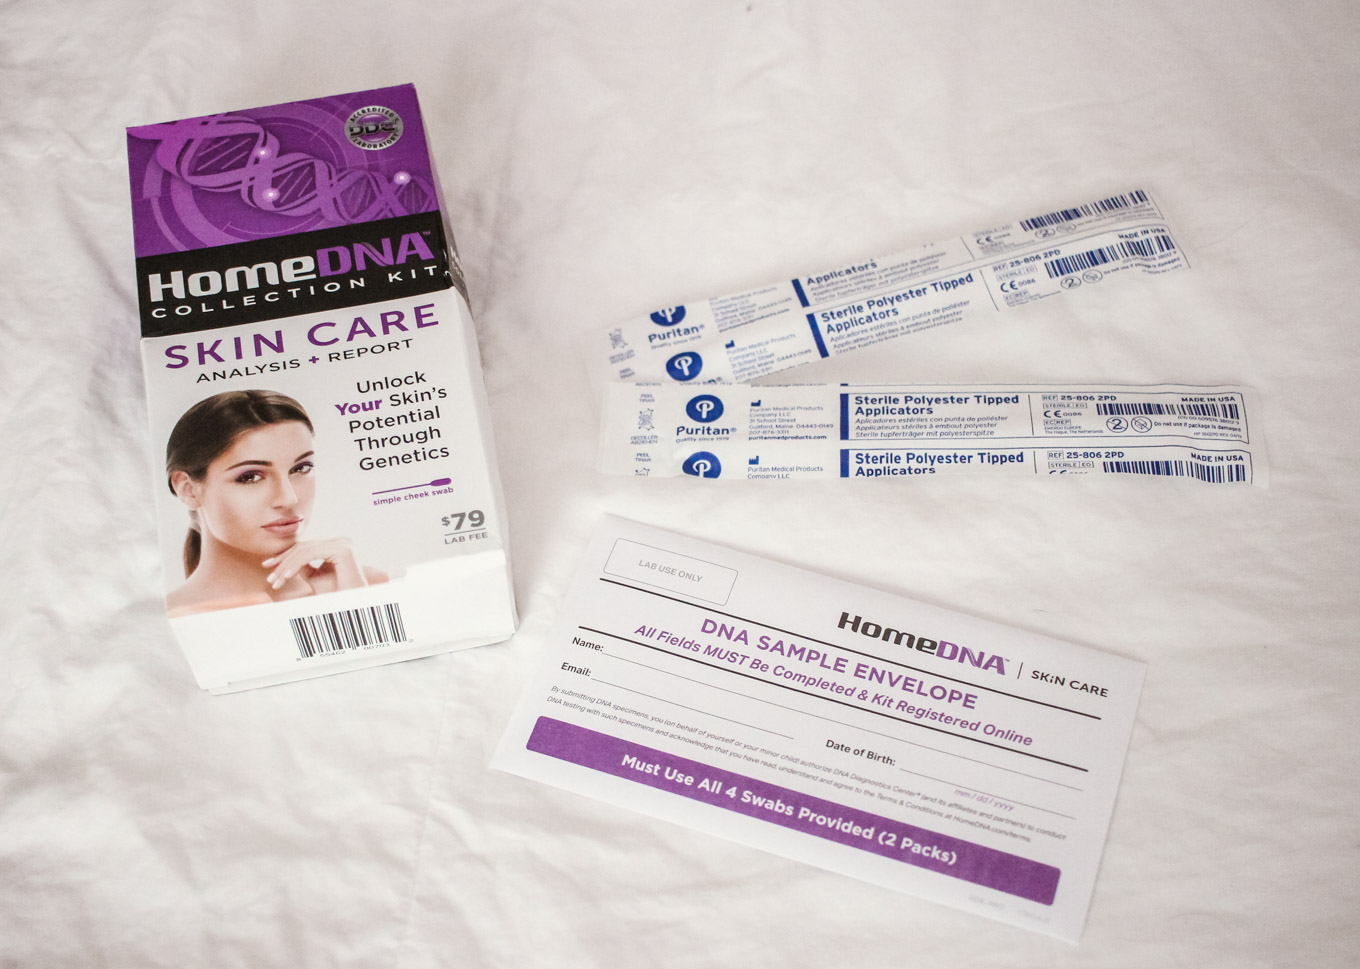 Lifestyle blogger Roxanne of Glass of Glam's review of the HomeDNA Skin Care Analysis